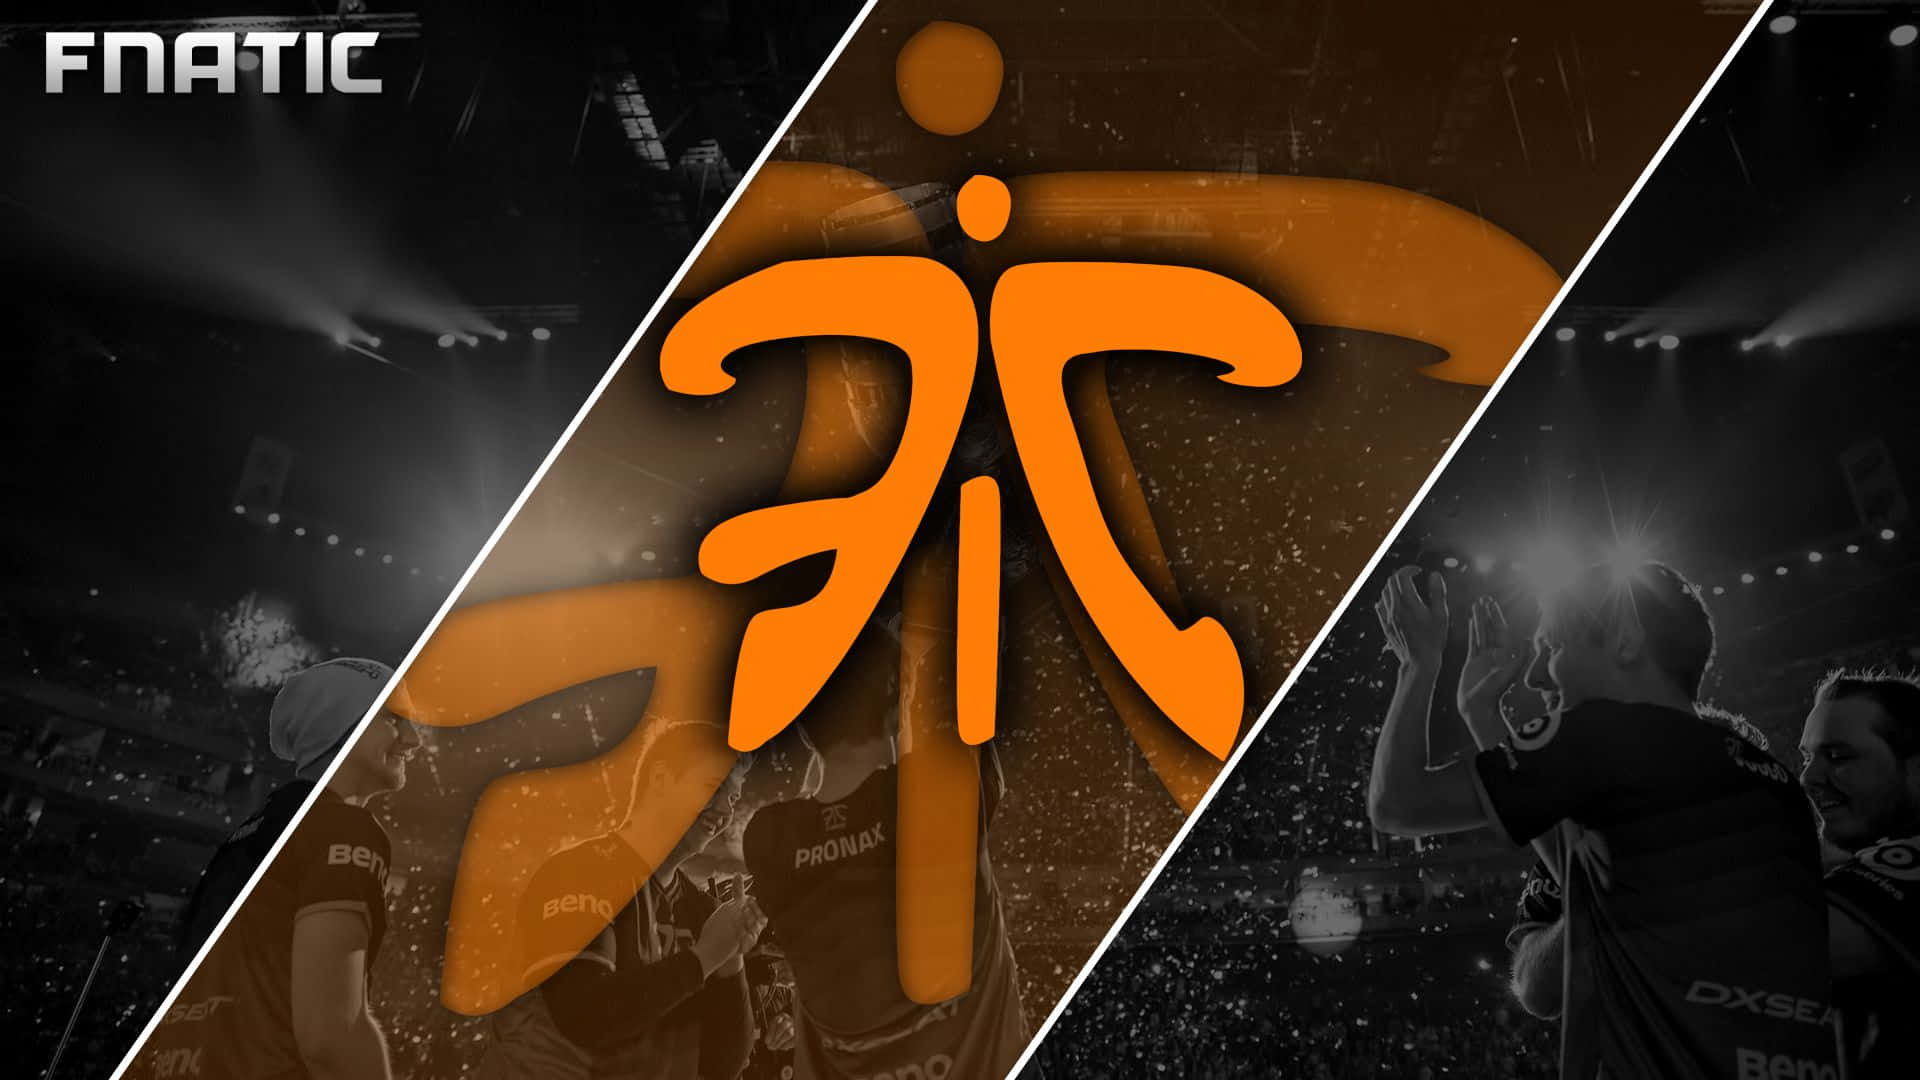 A Competitive Gaming Triumph With Team Fnatic Wallpaper